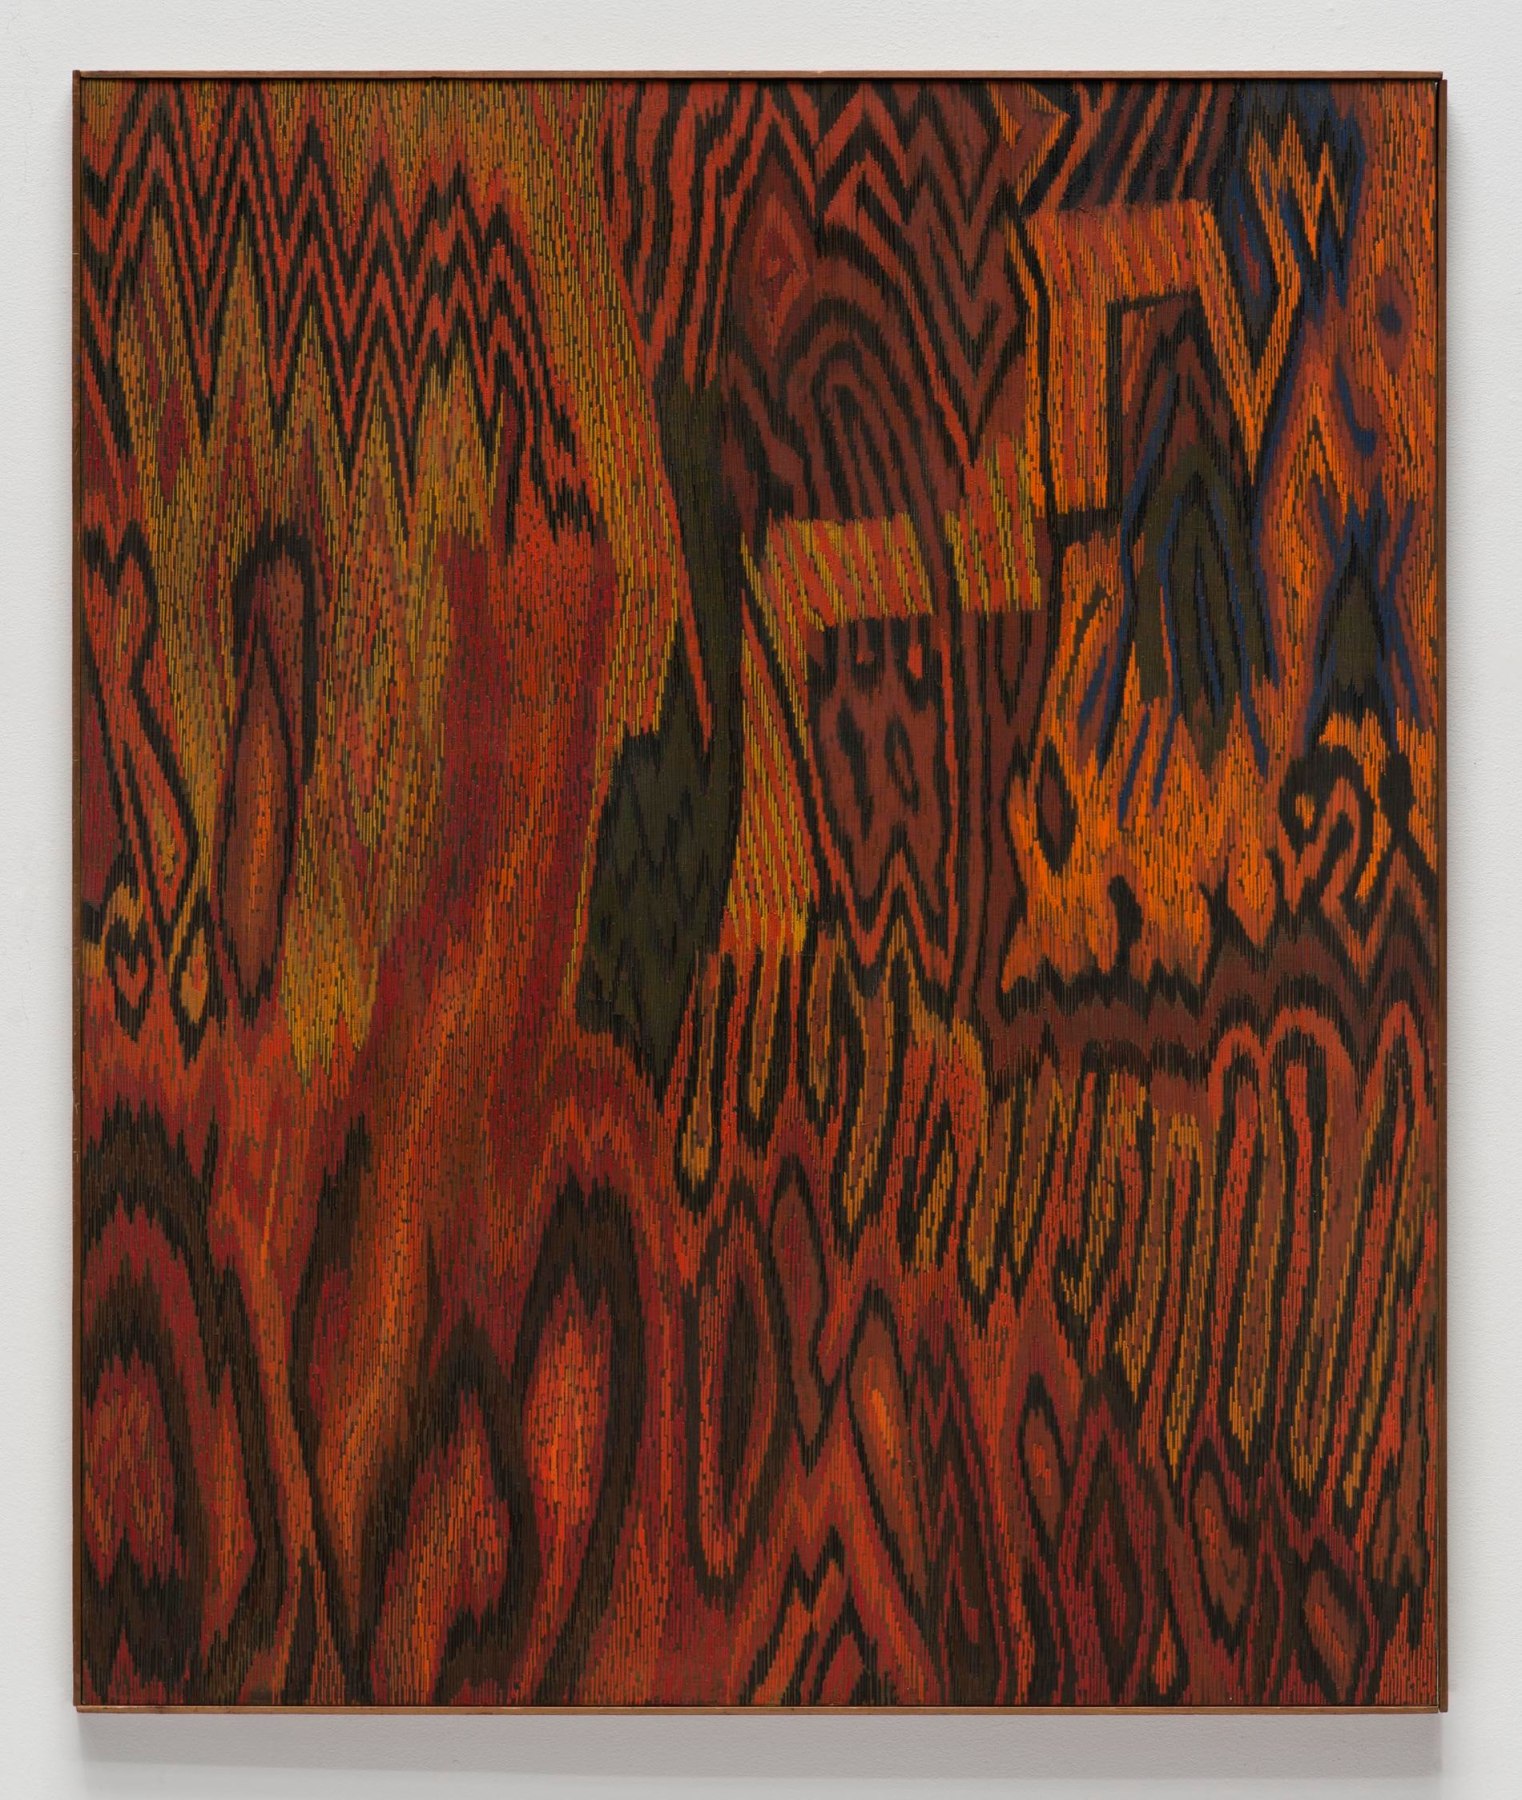 Image of LEE MULLICAN's The Arrival of the Quetzalcoatl, 1963